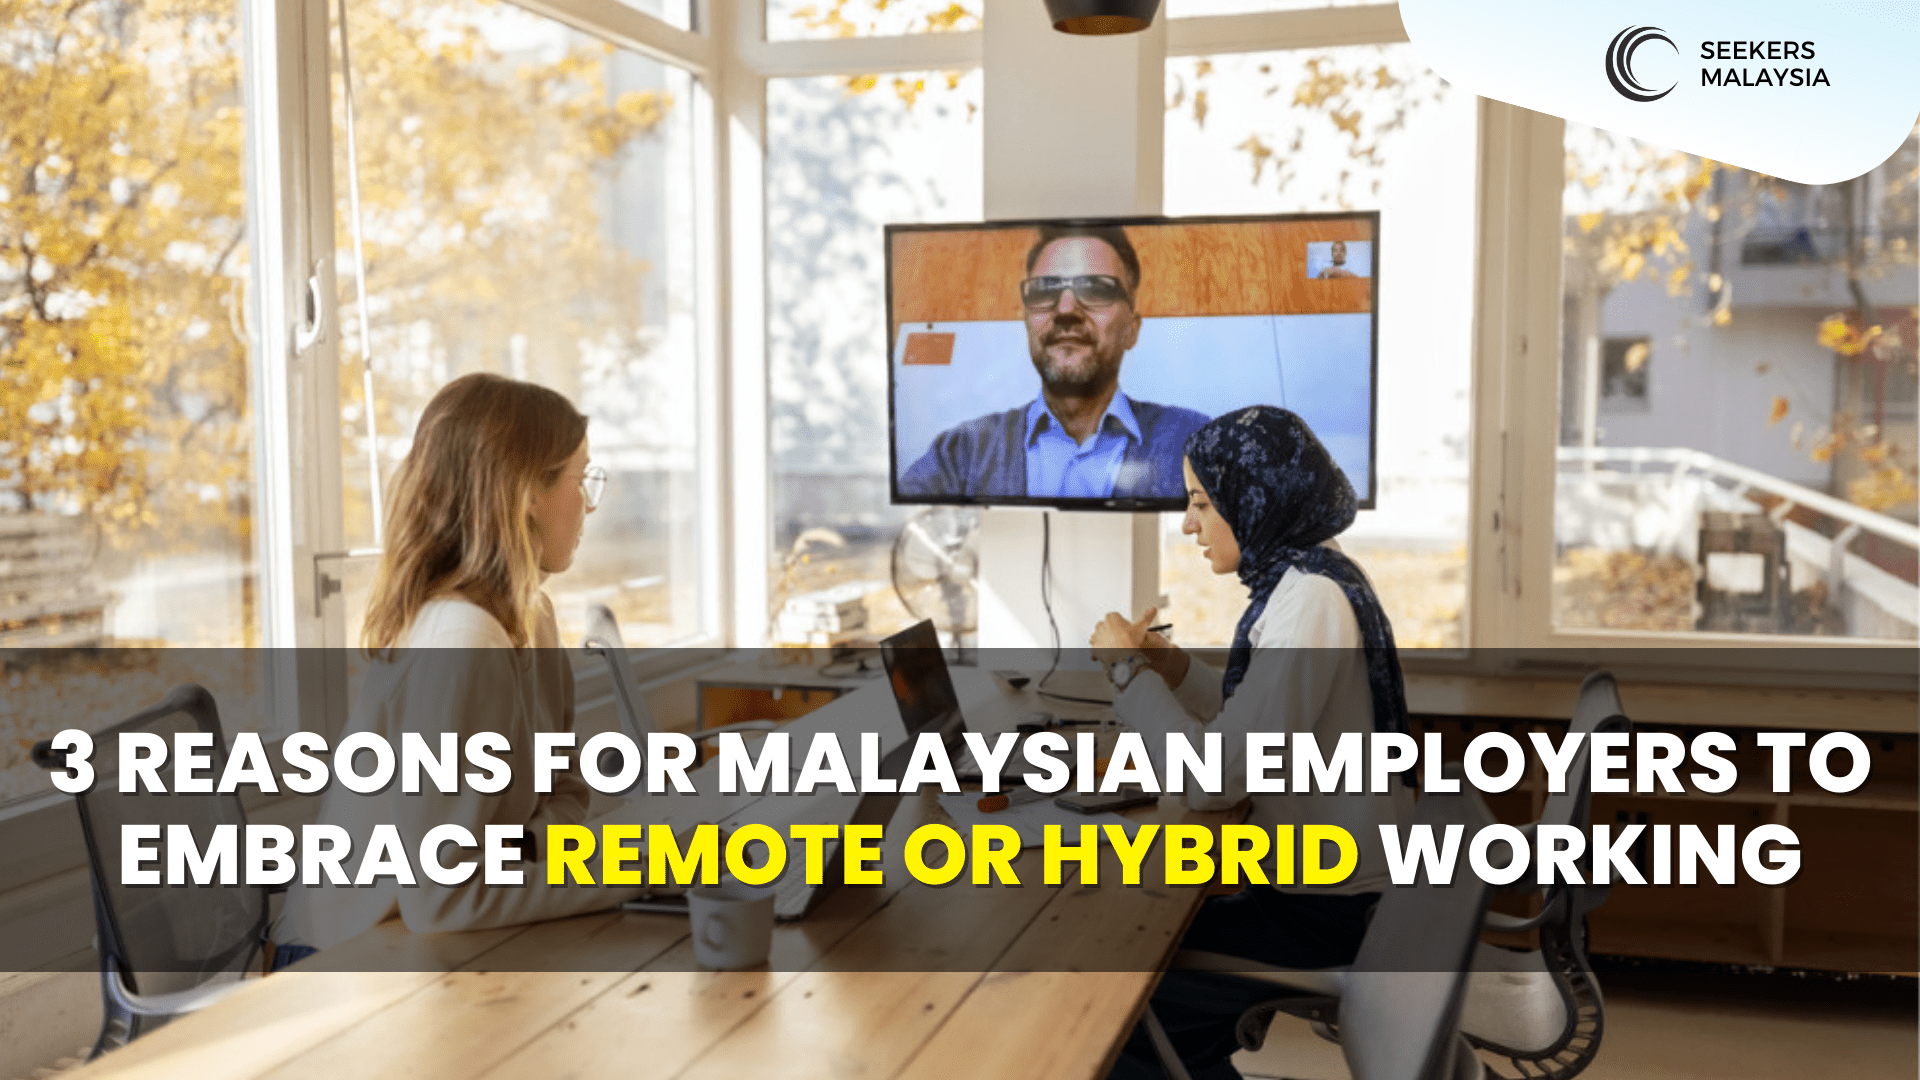 3 Reasons for Malaysian Employers to Embrace Remote or Hybrid Working